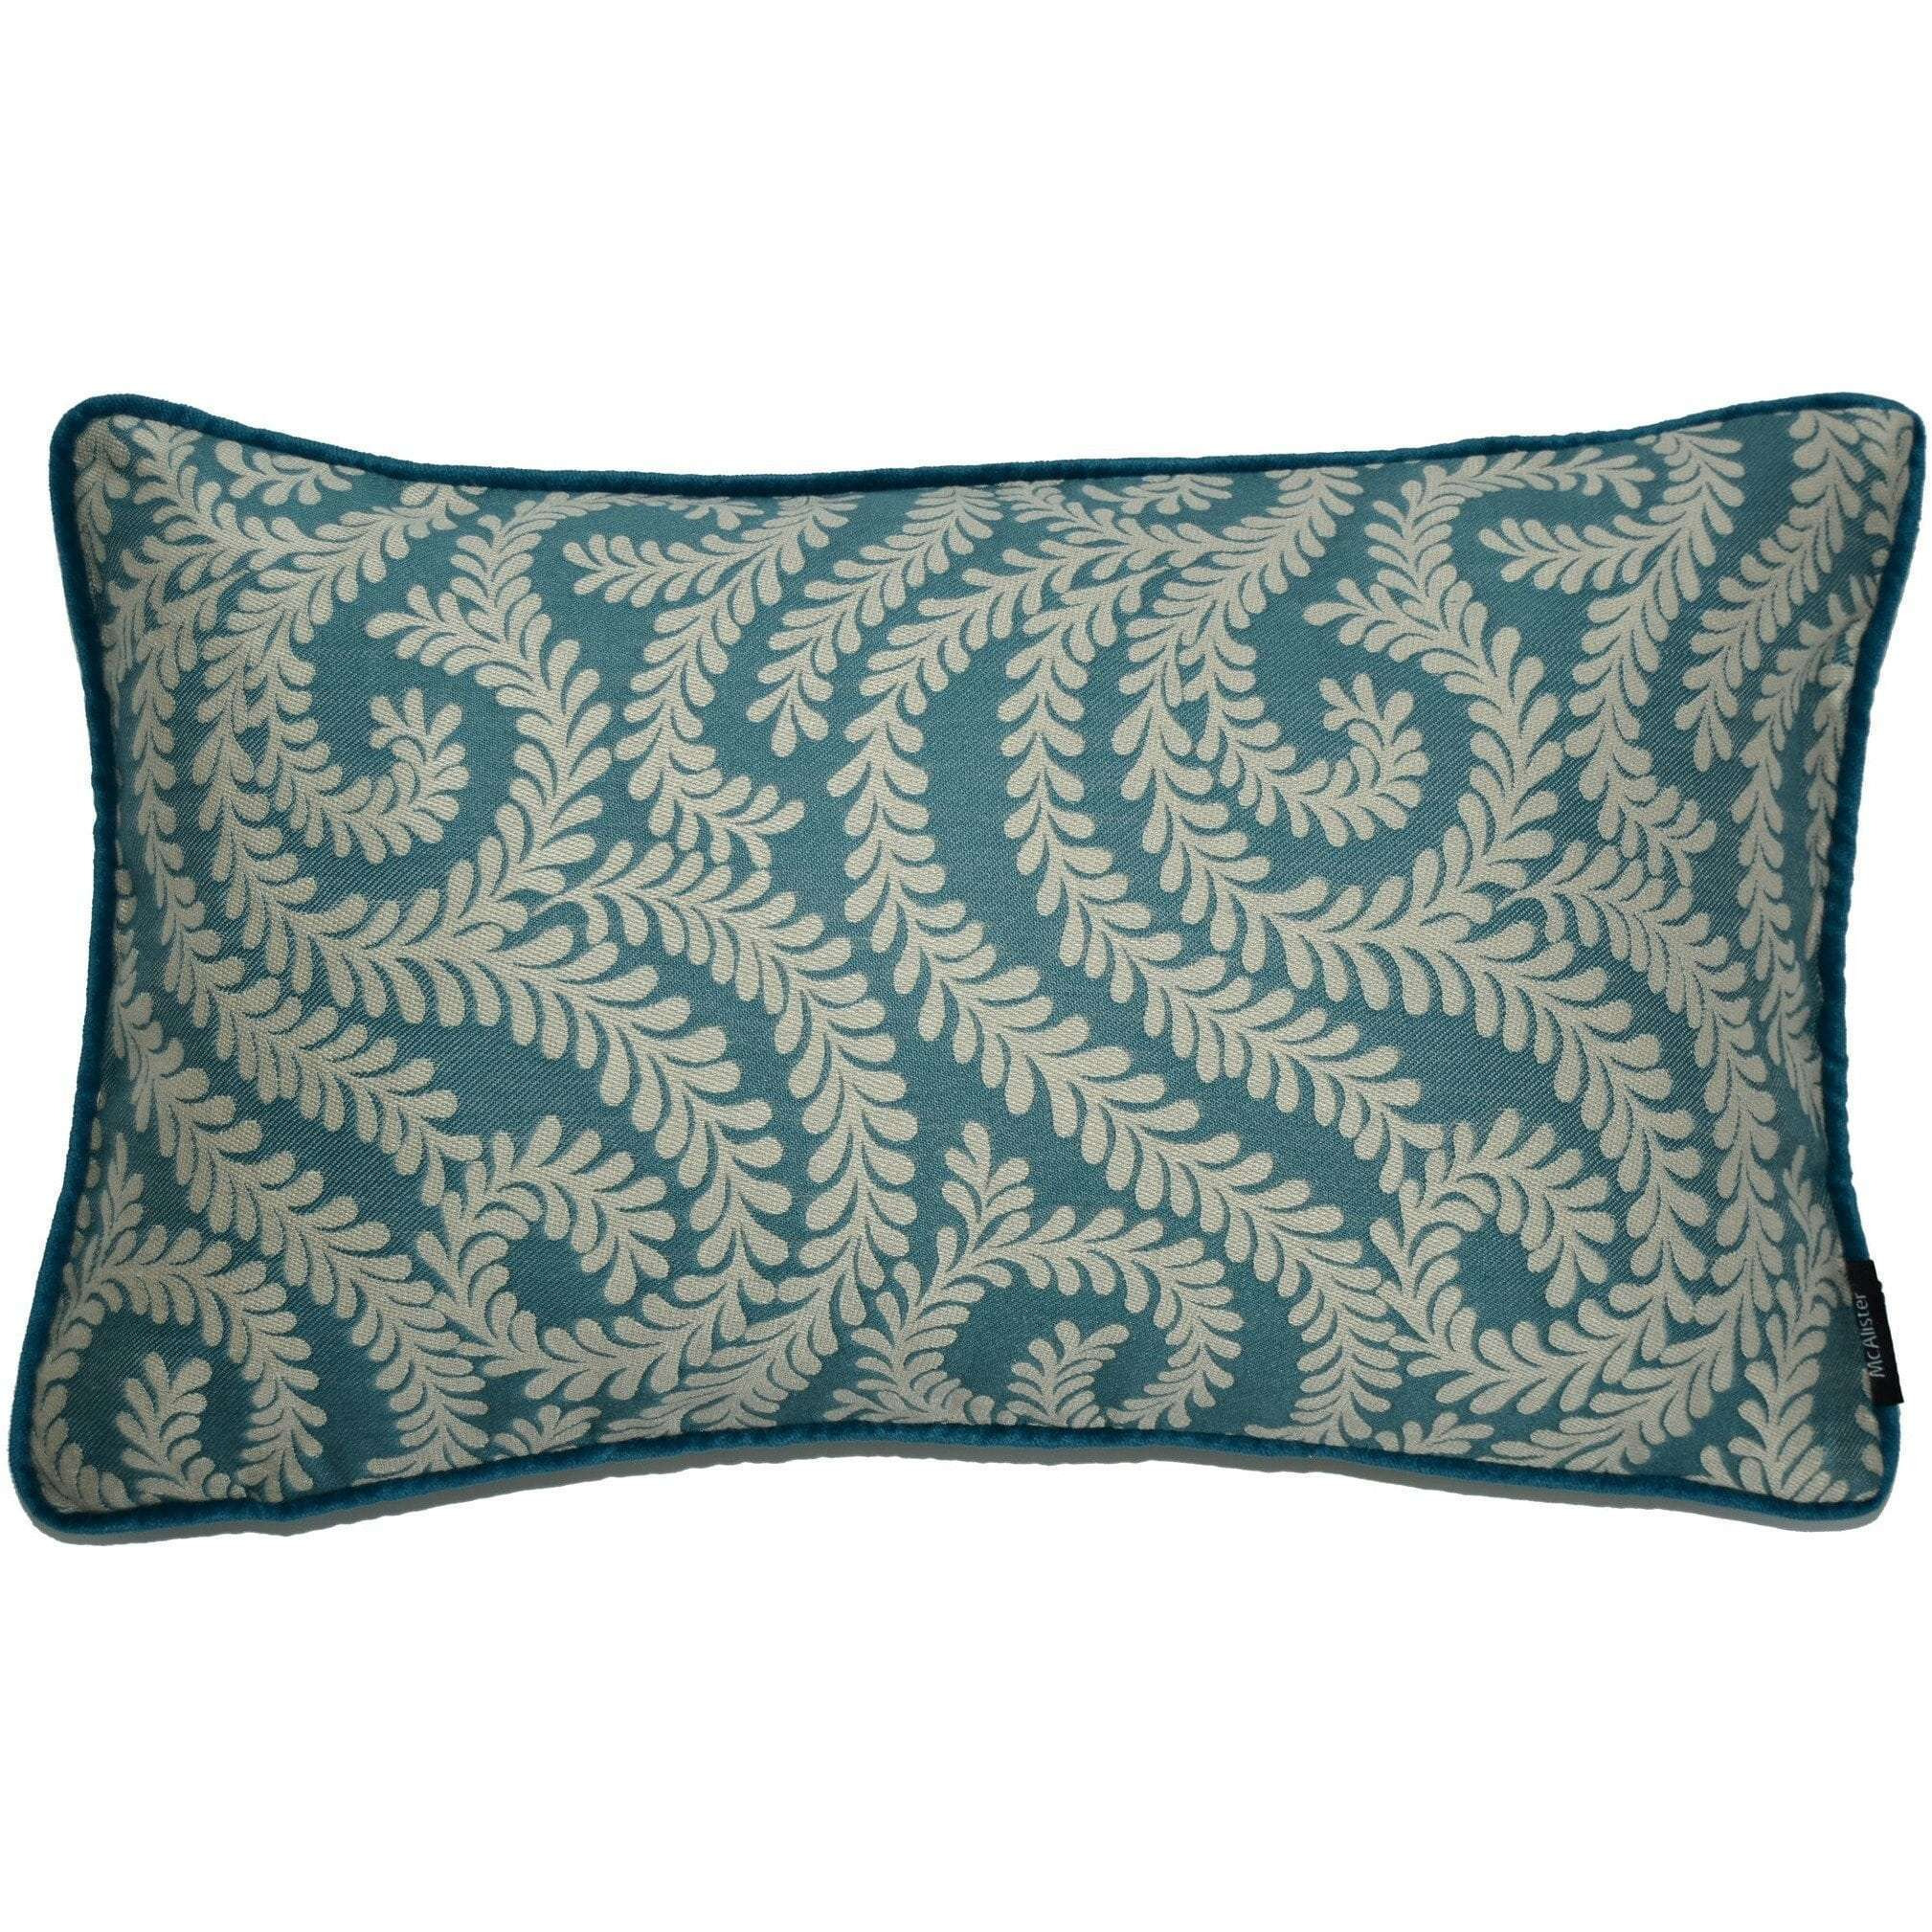 Little Leaf Teal Pillow, Cover Only / 50cm x 30cm